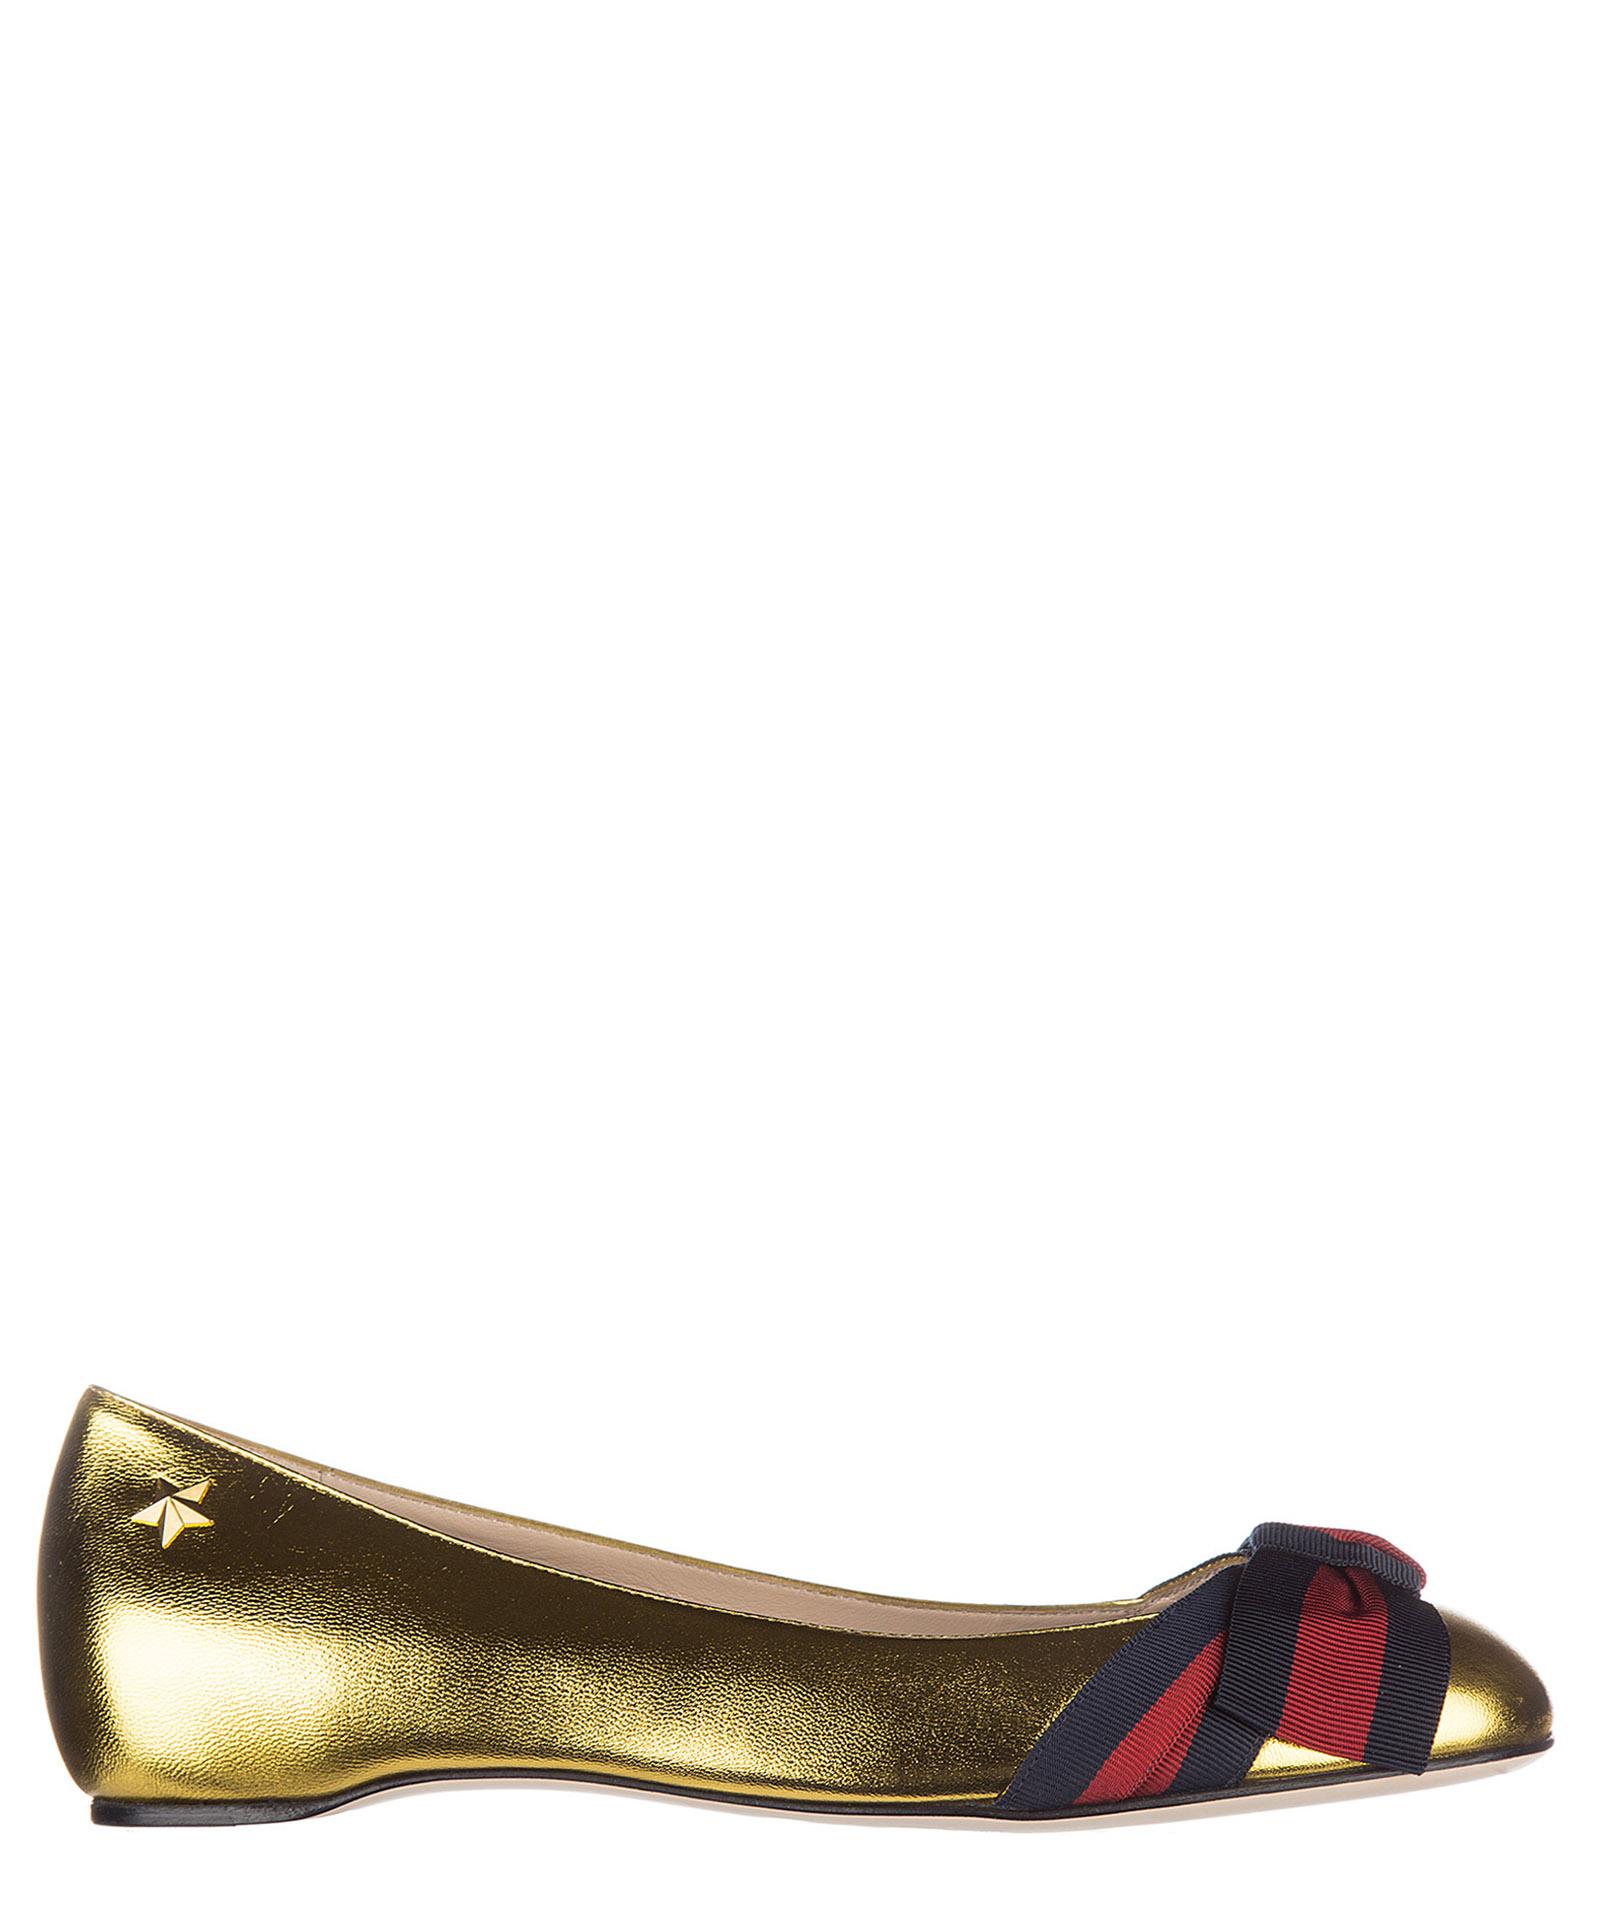 Gucci Ballet Flats in Brown | Lyst